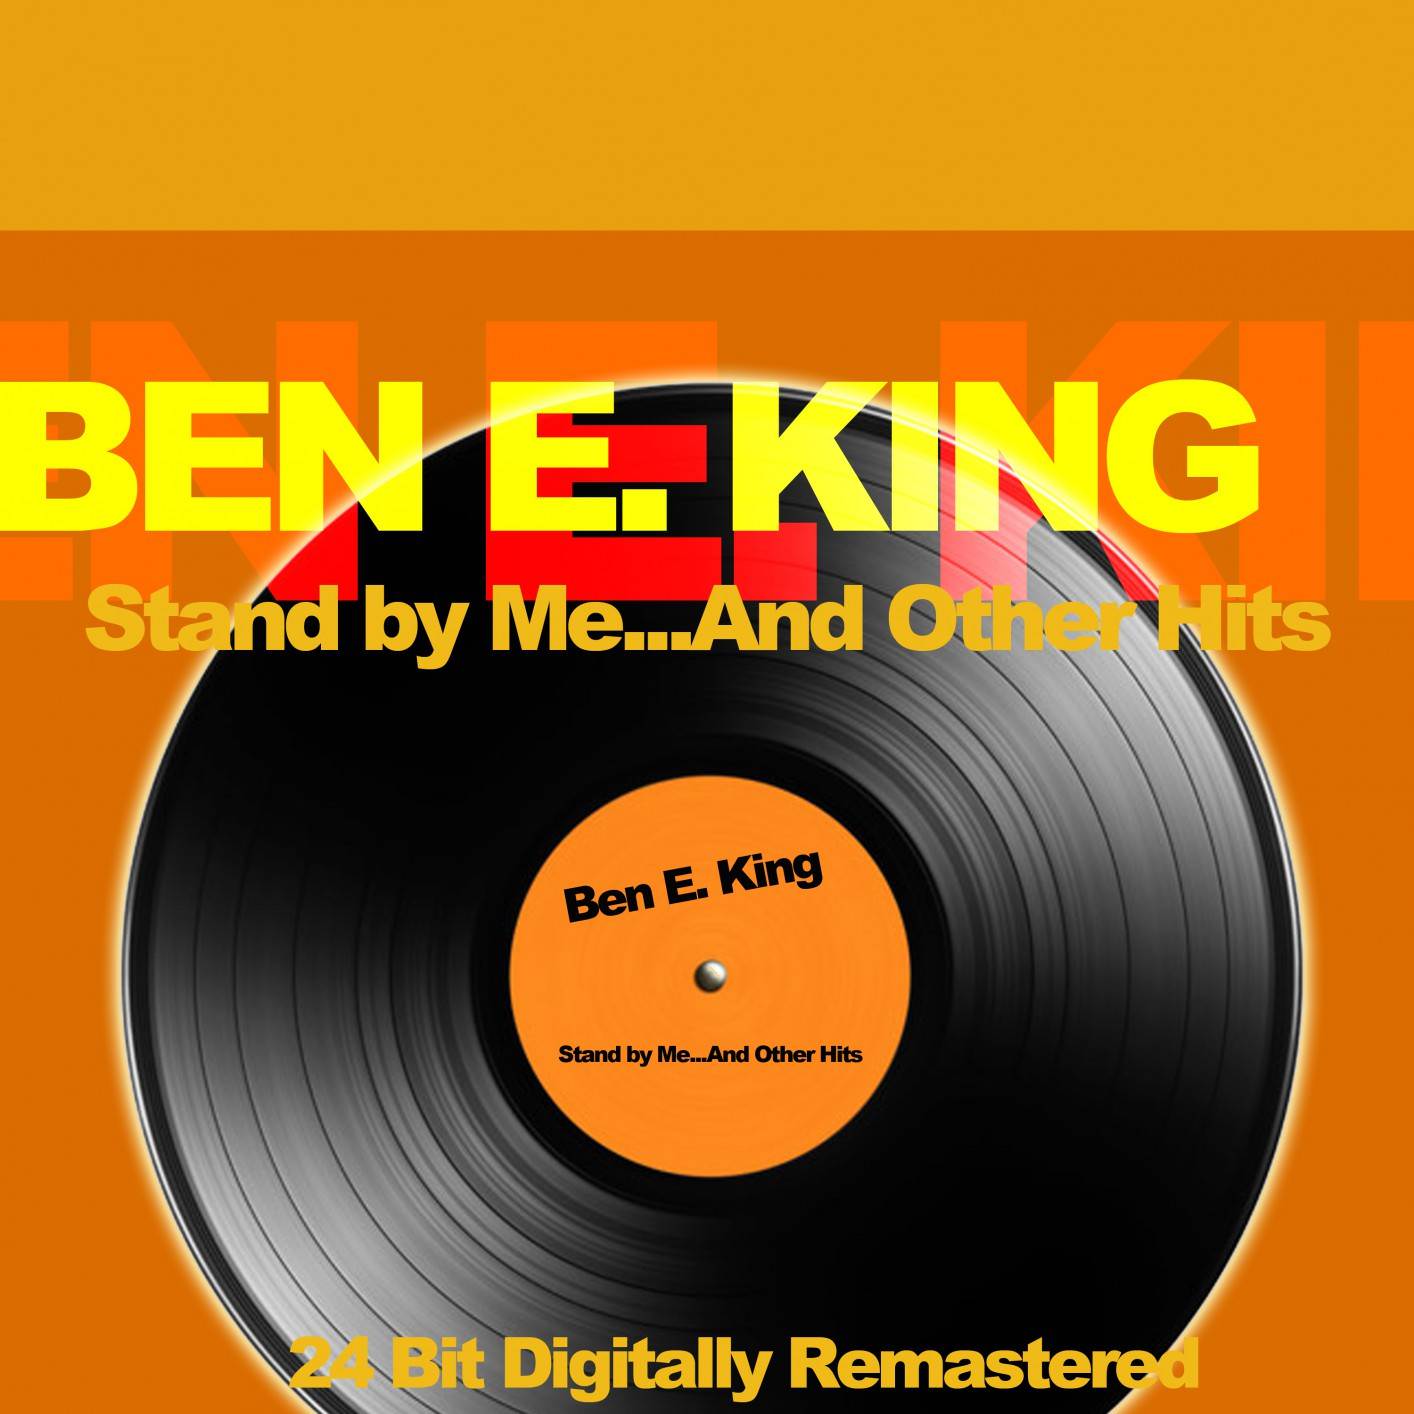 Ben E. King – Stand by Me…And Other Hits (2018) [FLAC 24bit/48kHz]